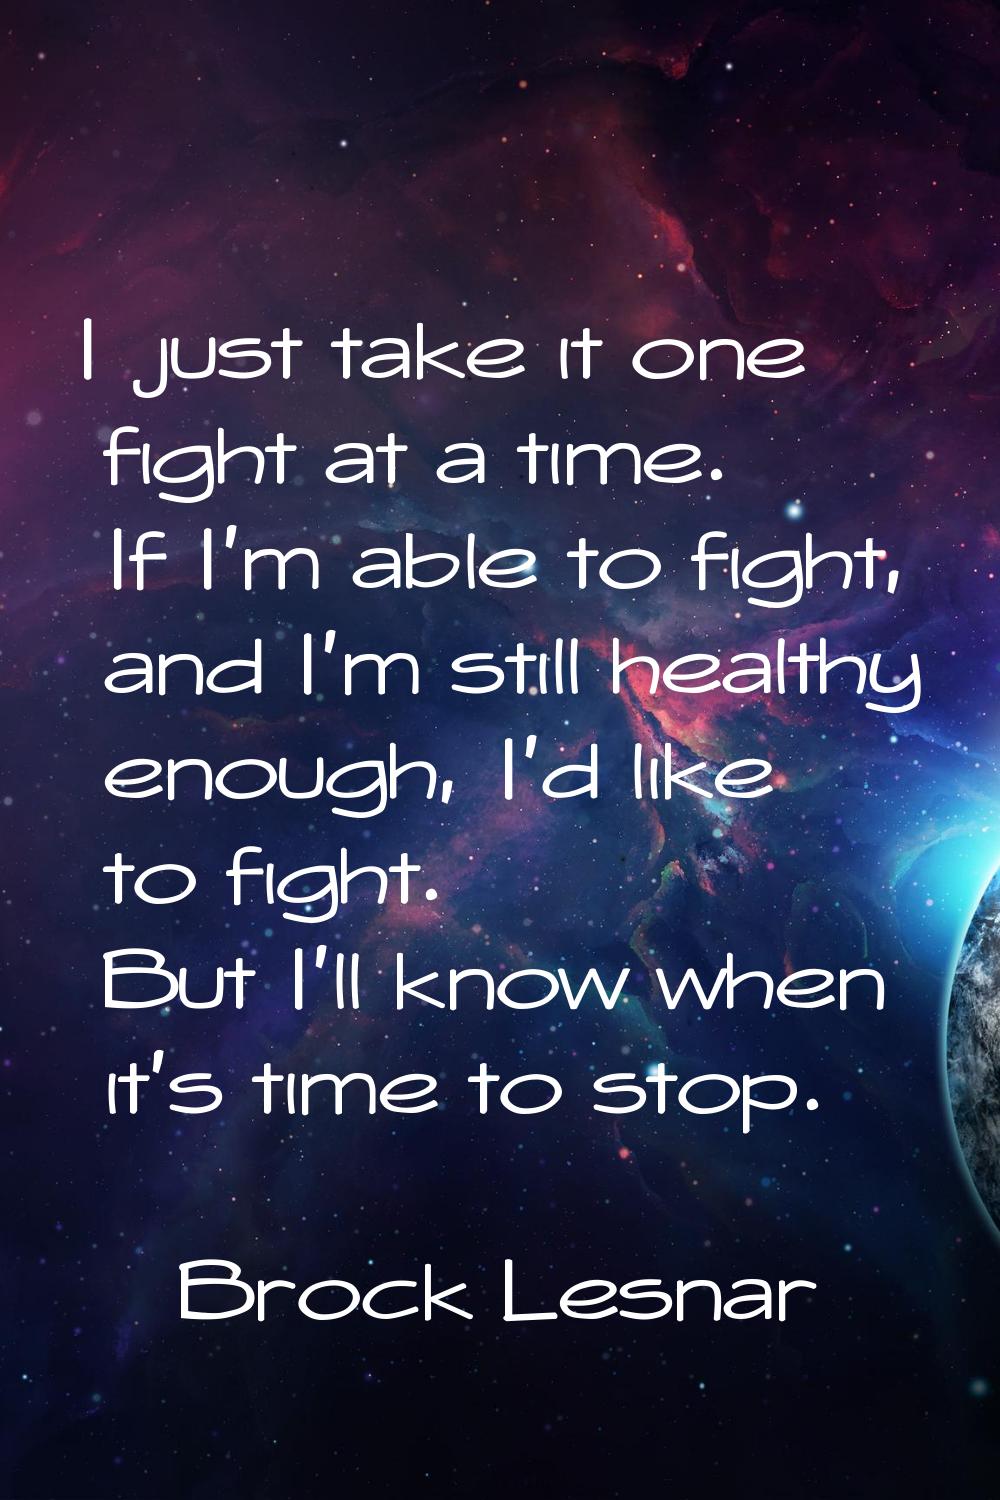 I just take it one fight at a time. If I'm able to fight, and I'm still healthy enough, I'd like to